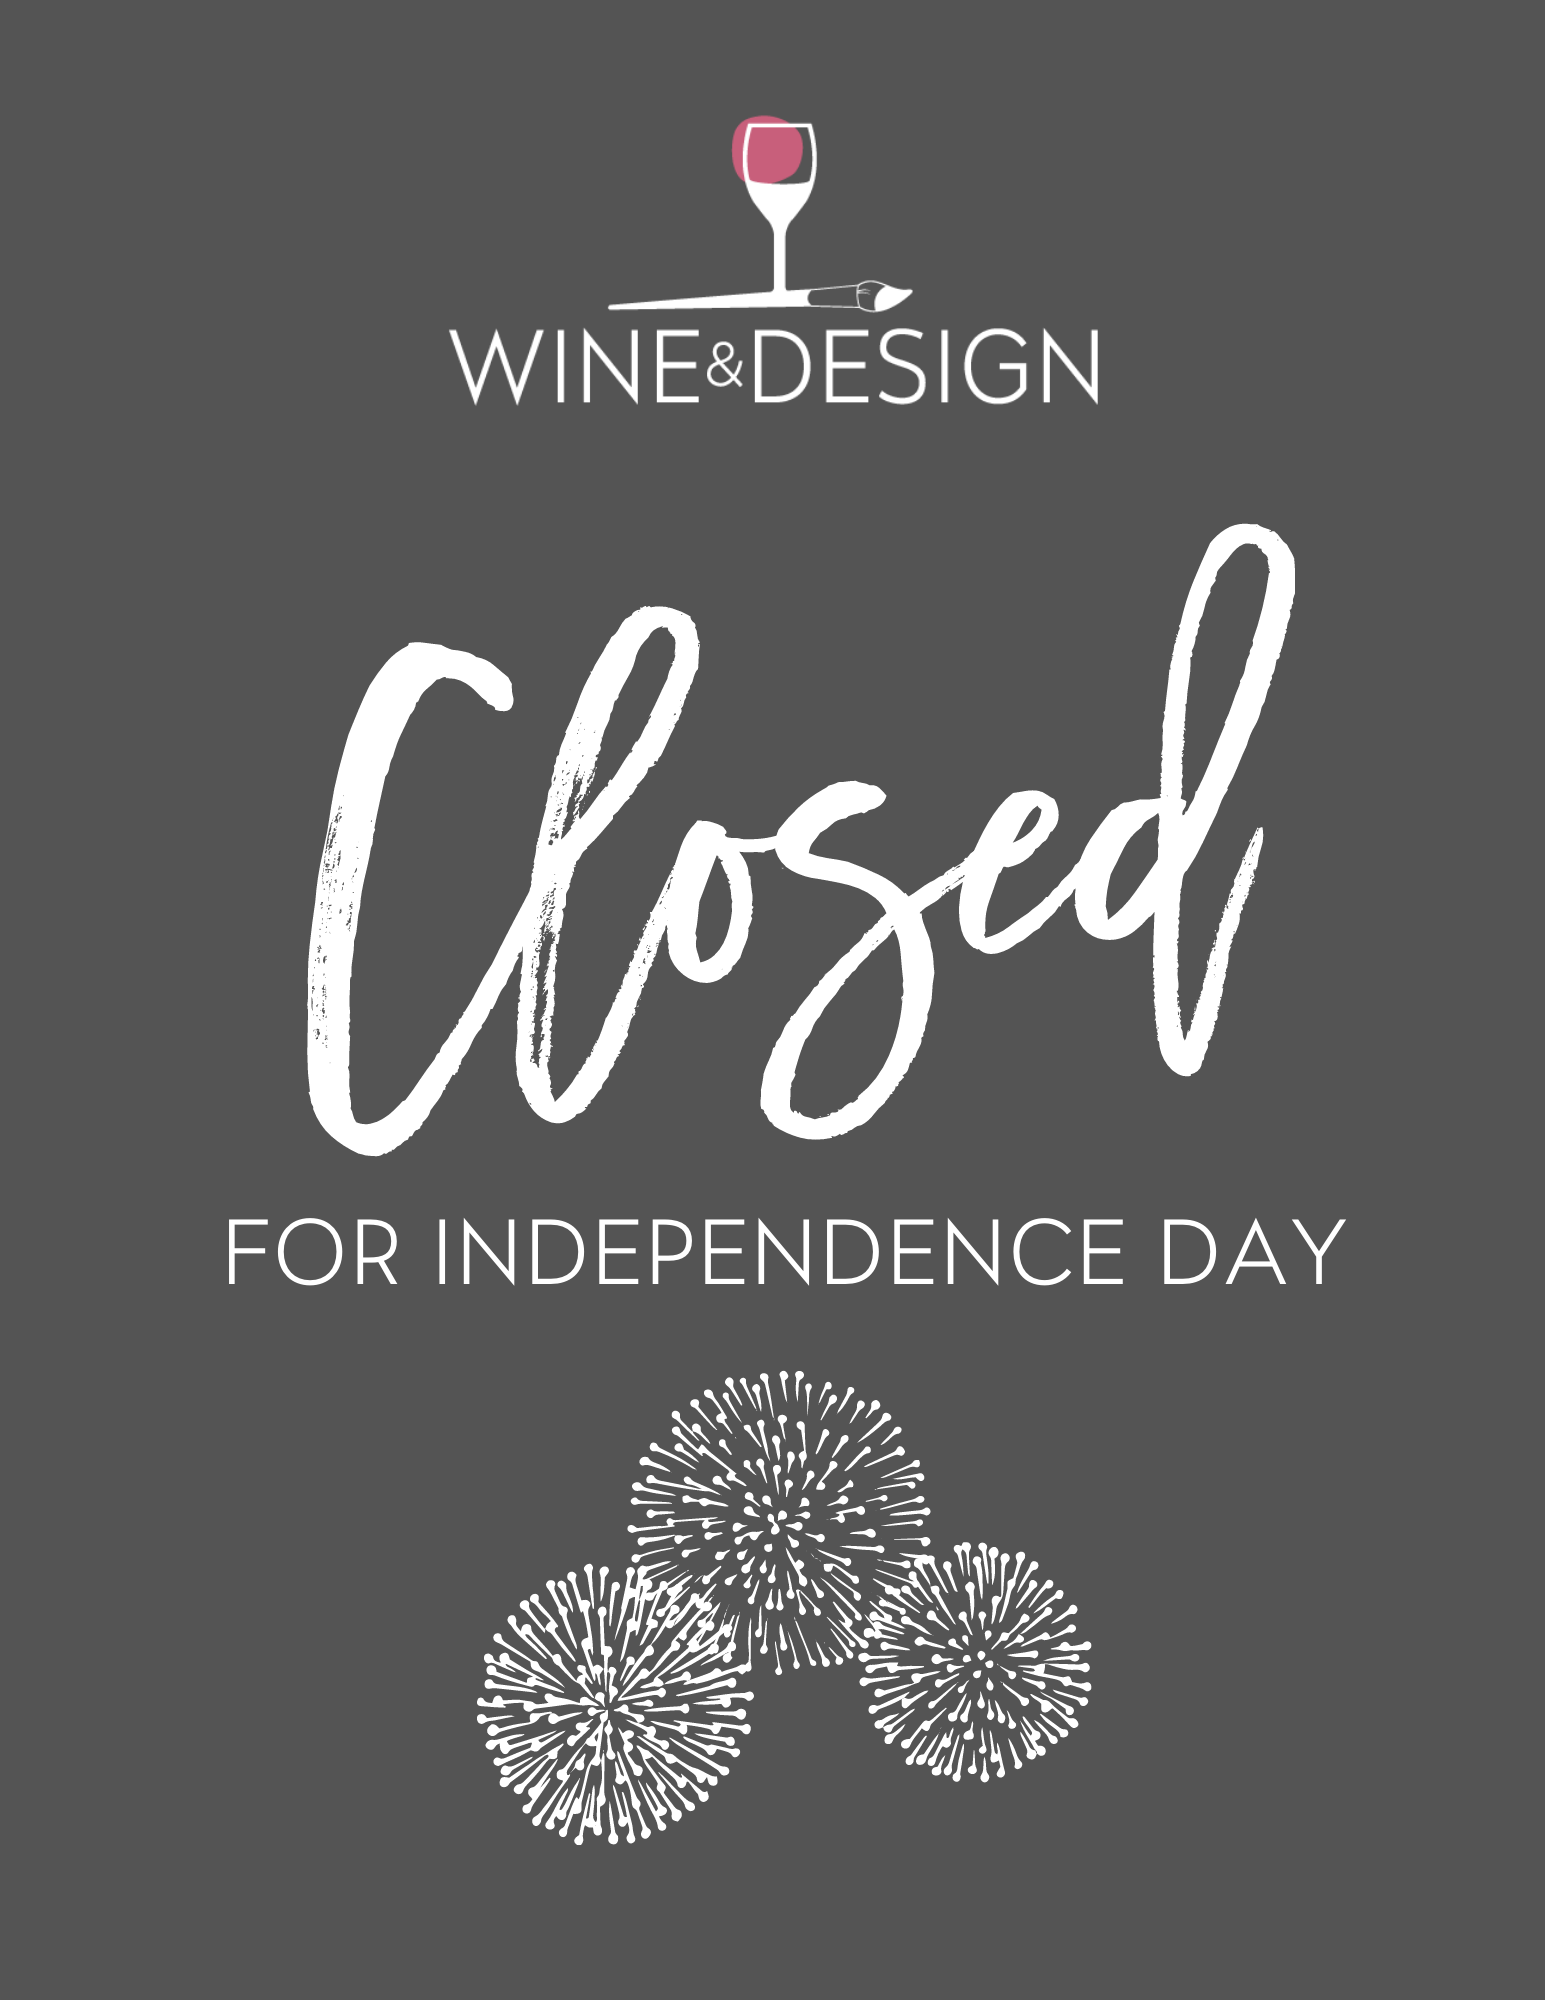 Studio Closed for the 4th of July!